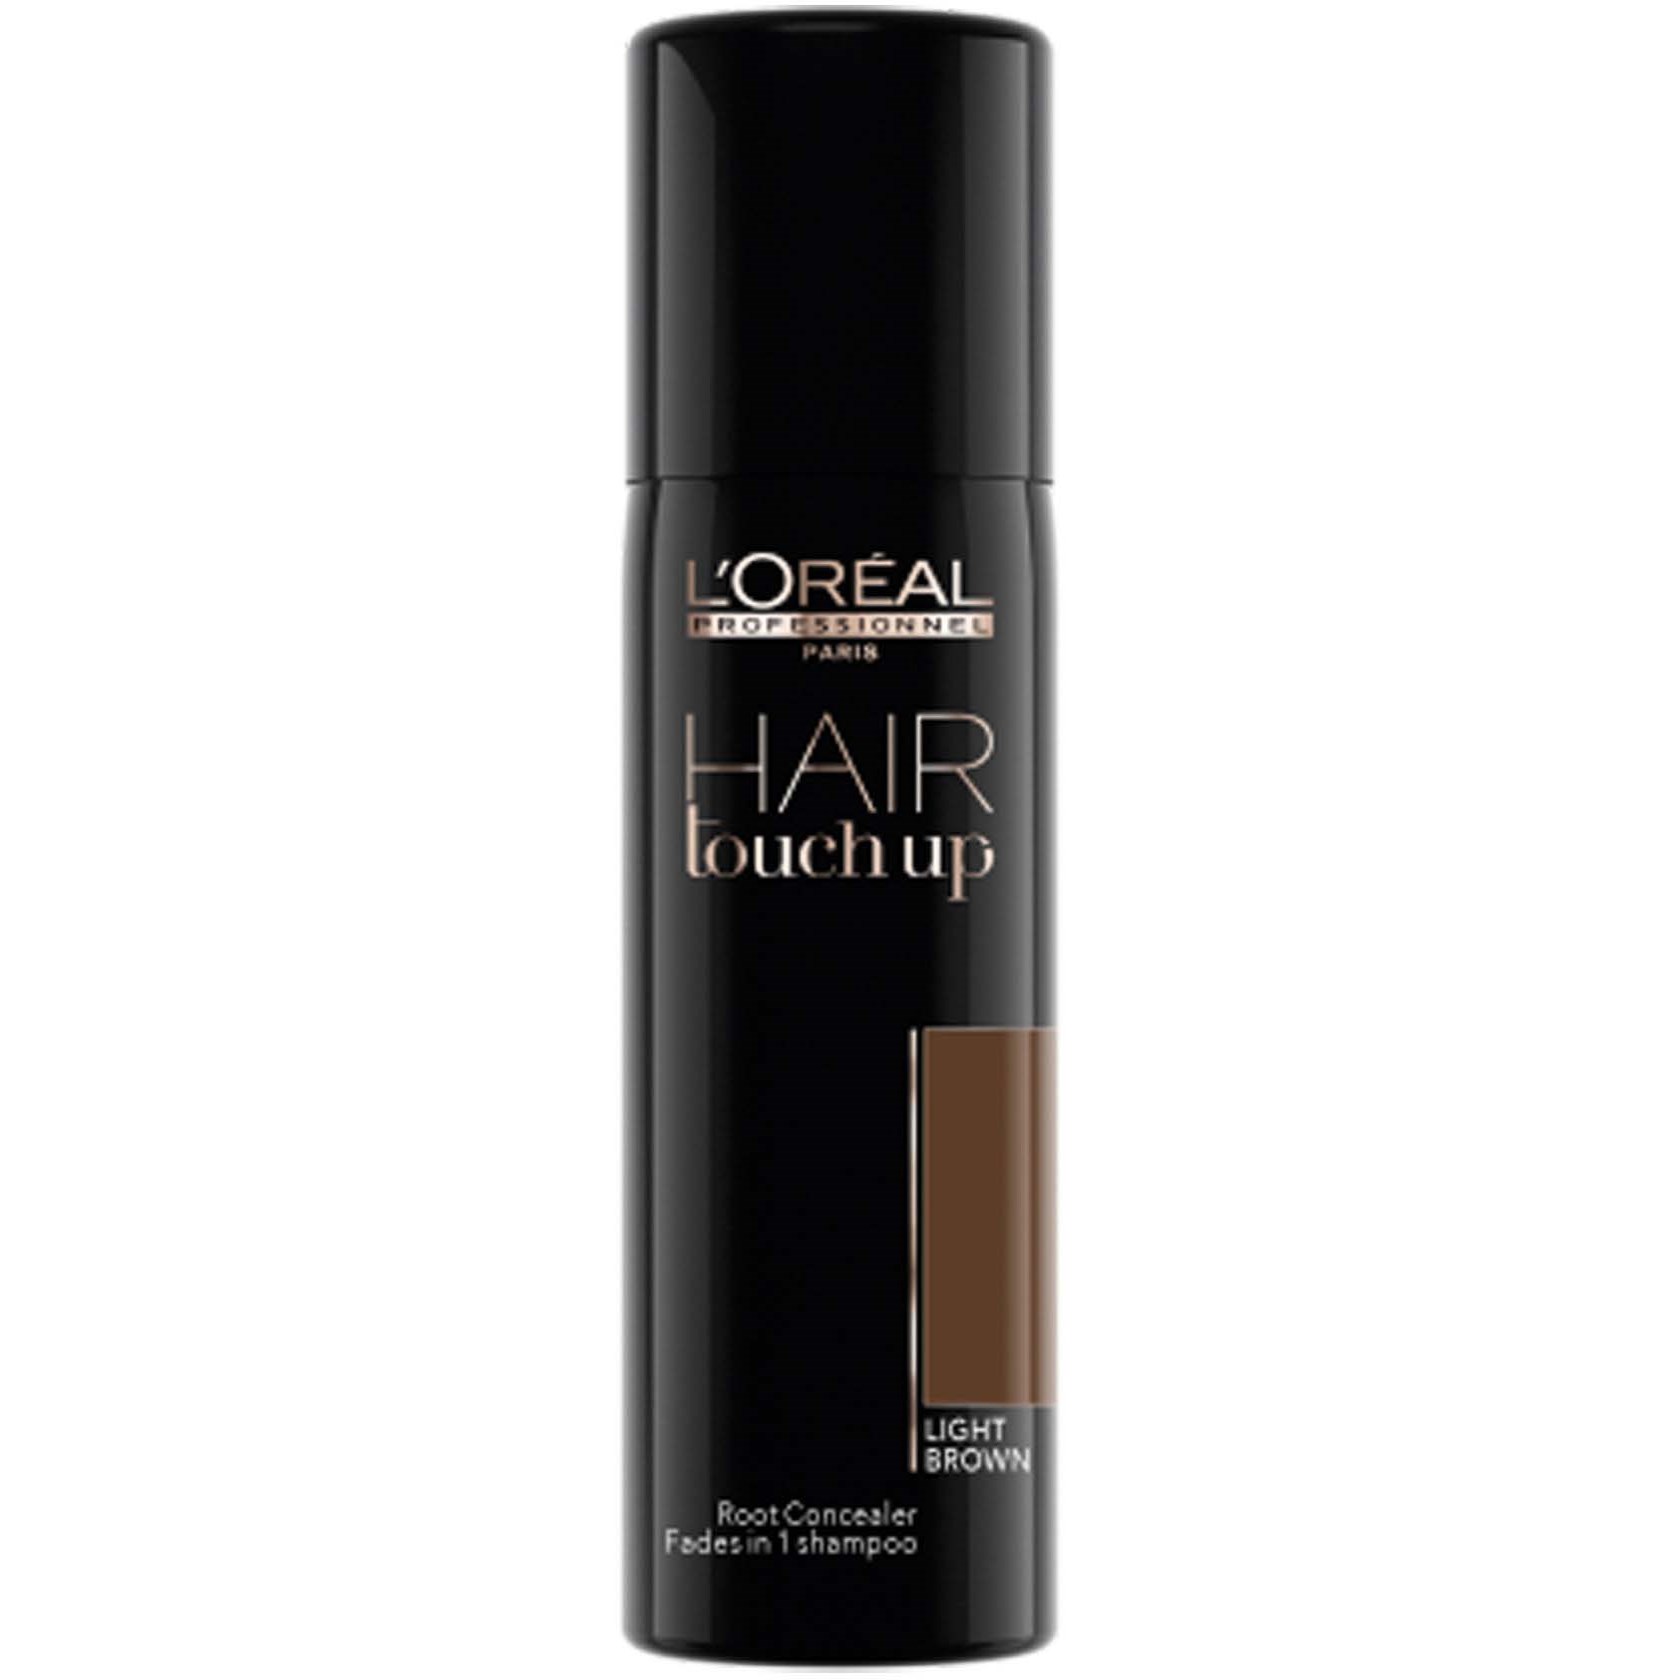 Läs mer om LOréal Professionnel Hair Touch Up Root Rescue Light Brown